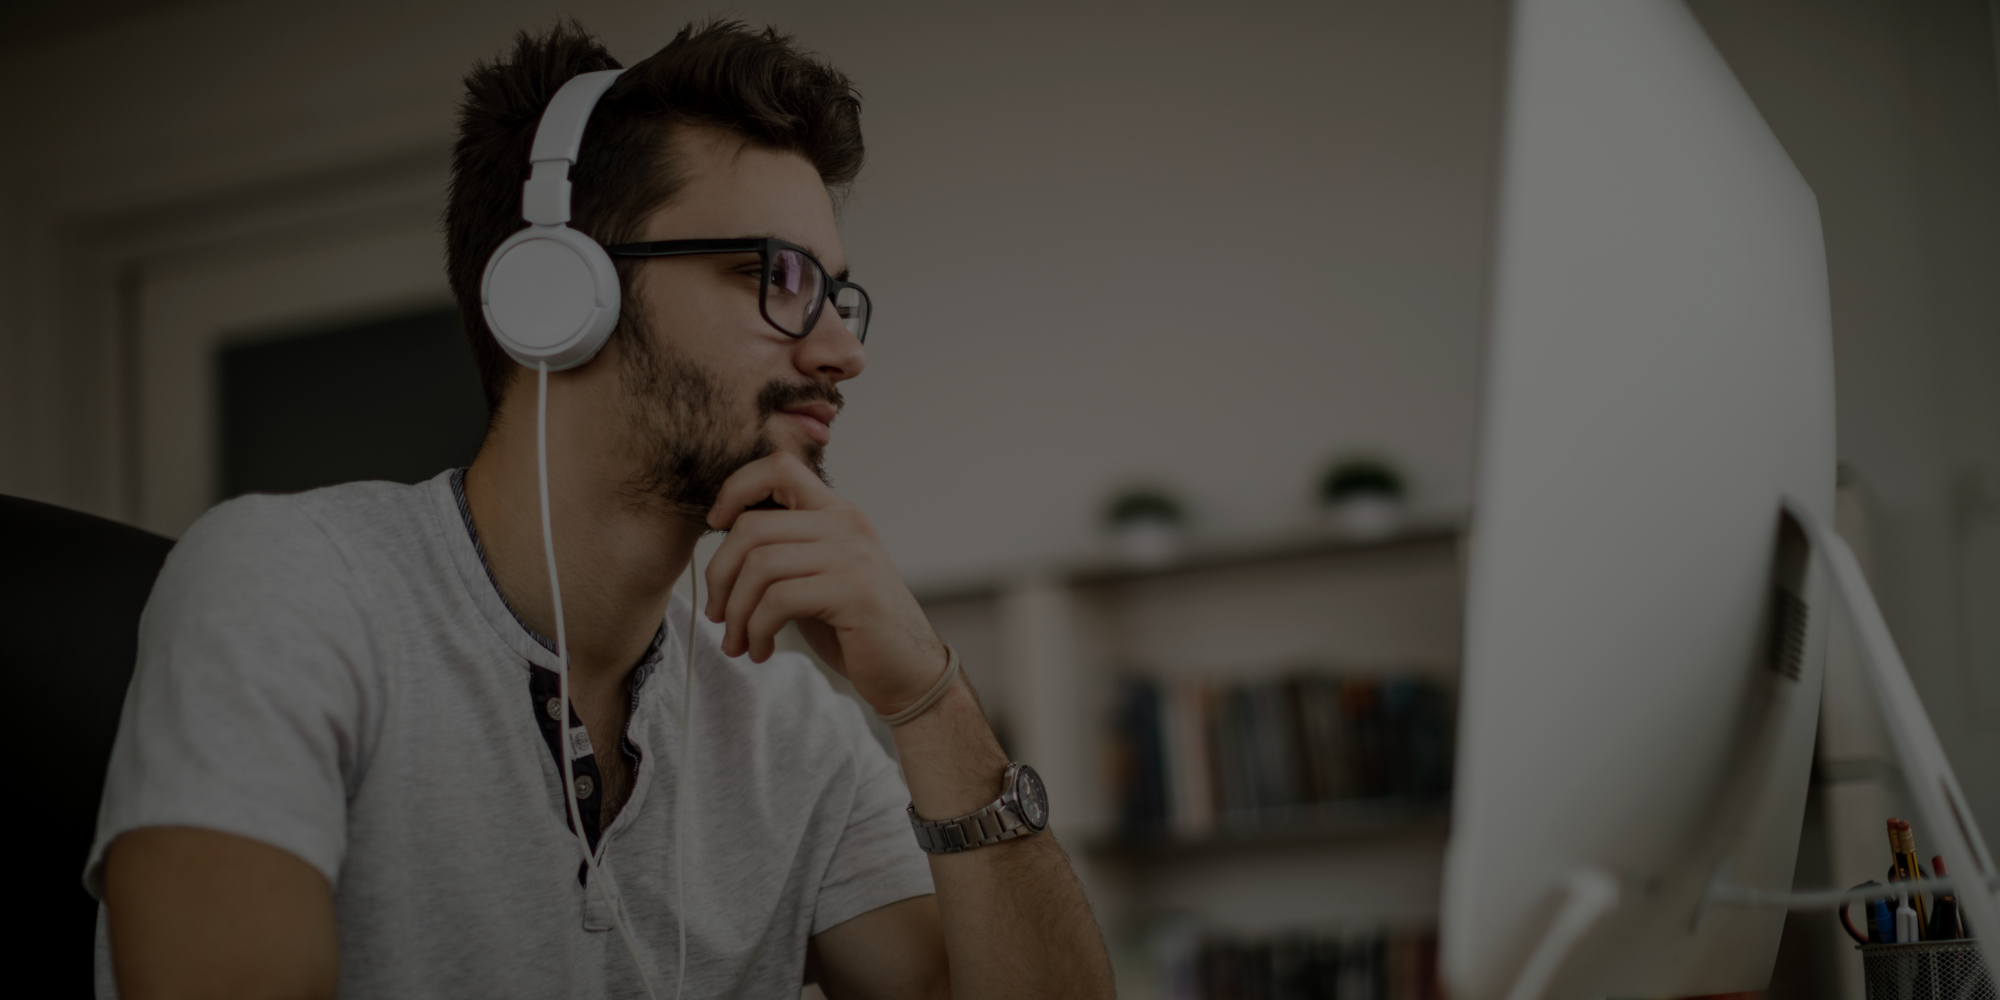 Does Music Really Help You Focus While Working